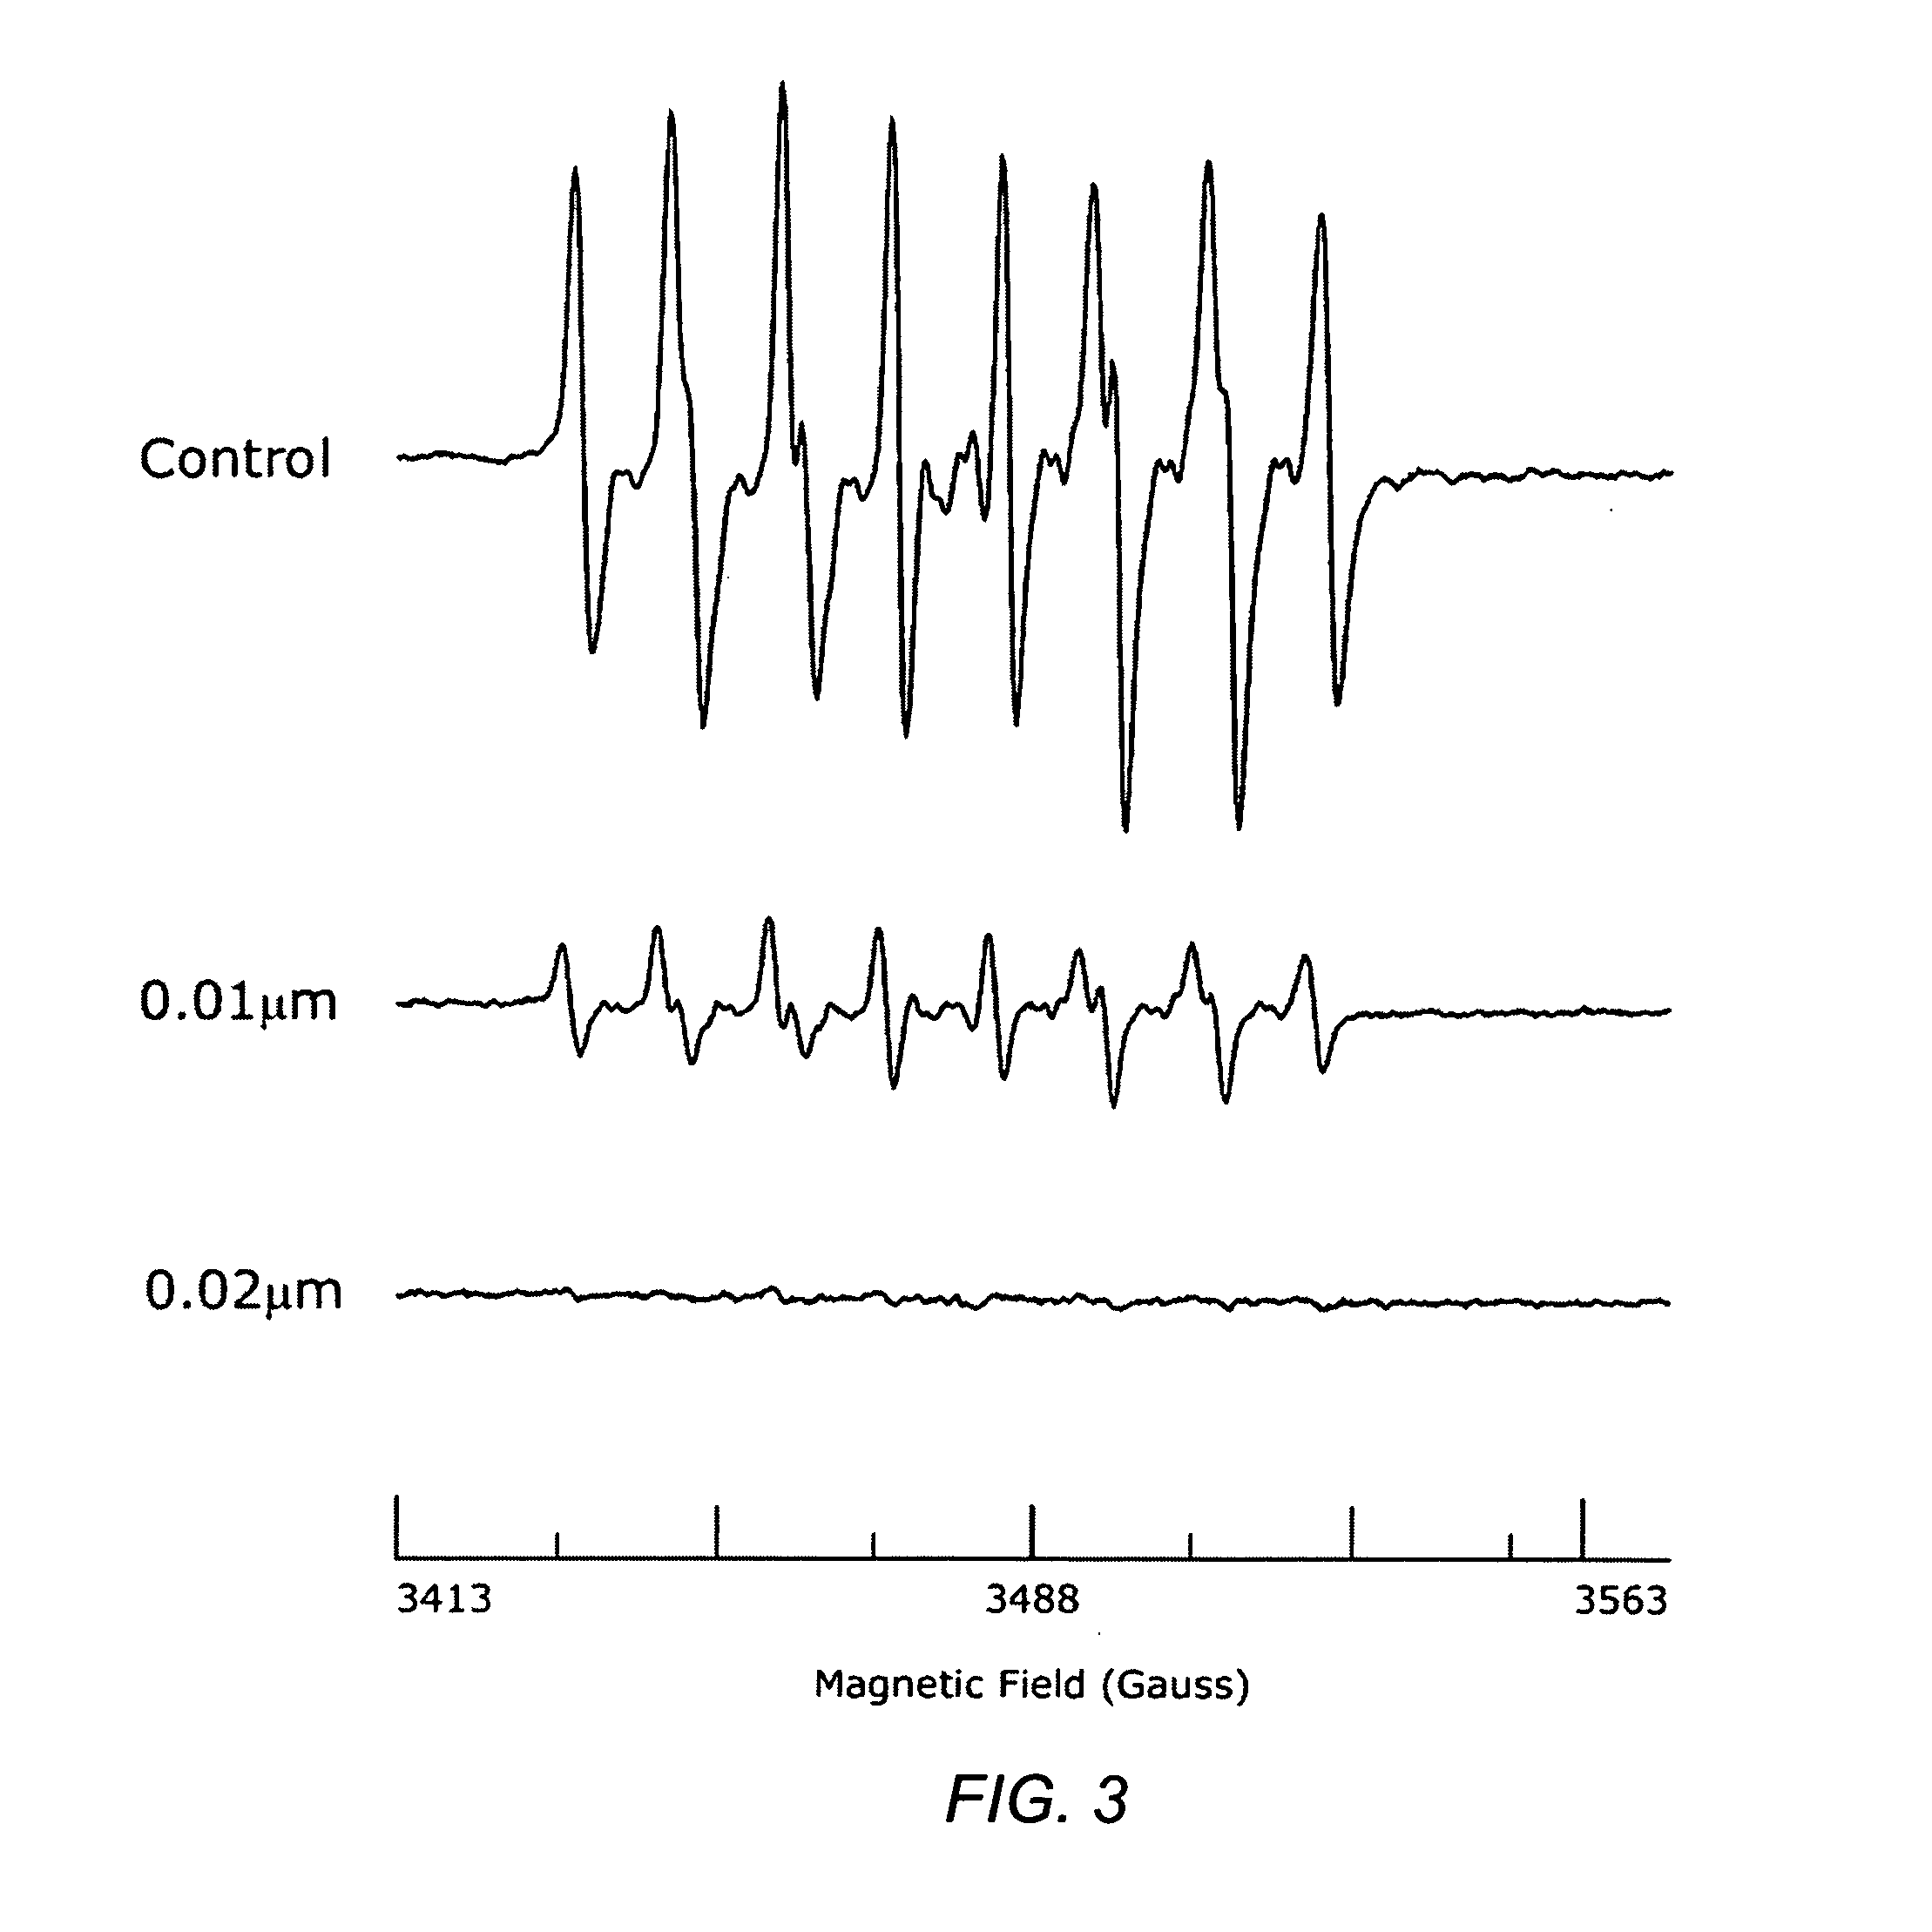 Pharmaceutical compositions including carotenoid ester analogs or derivatives for the inhibition and amelioration of disease